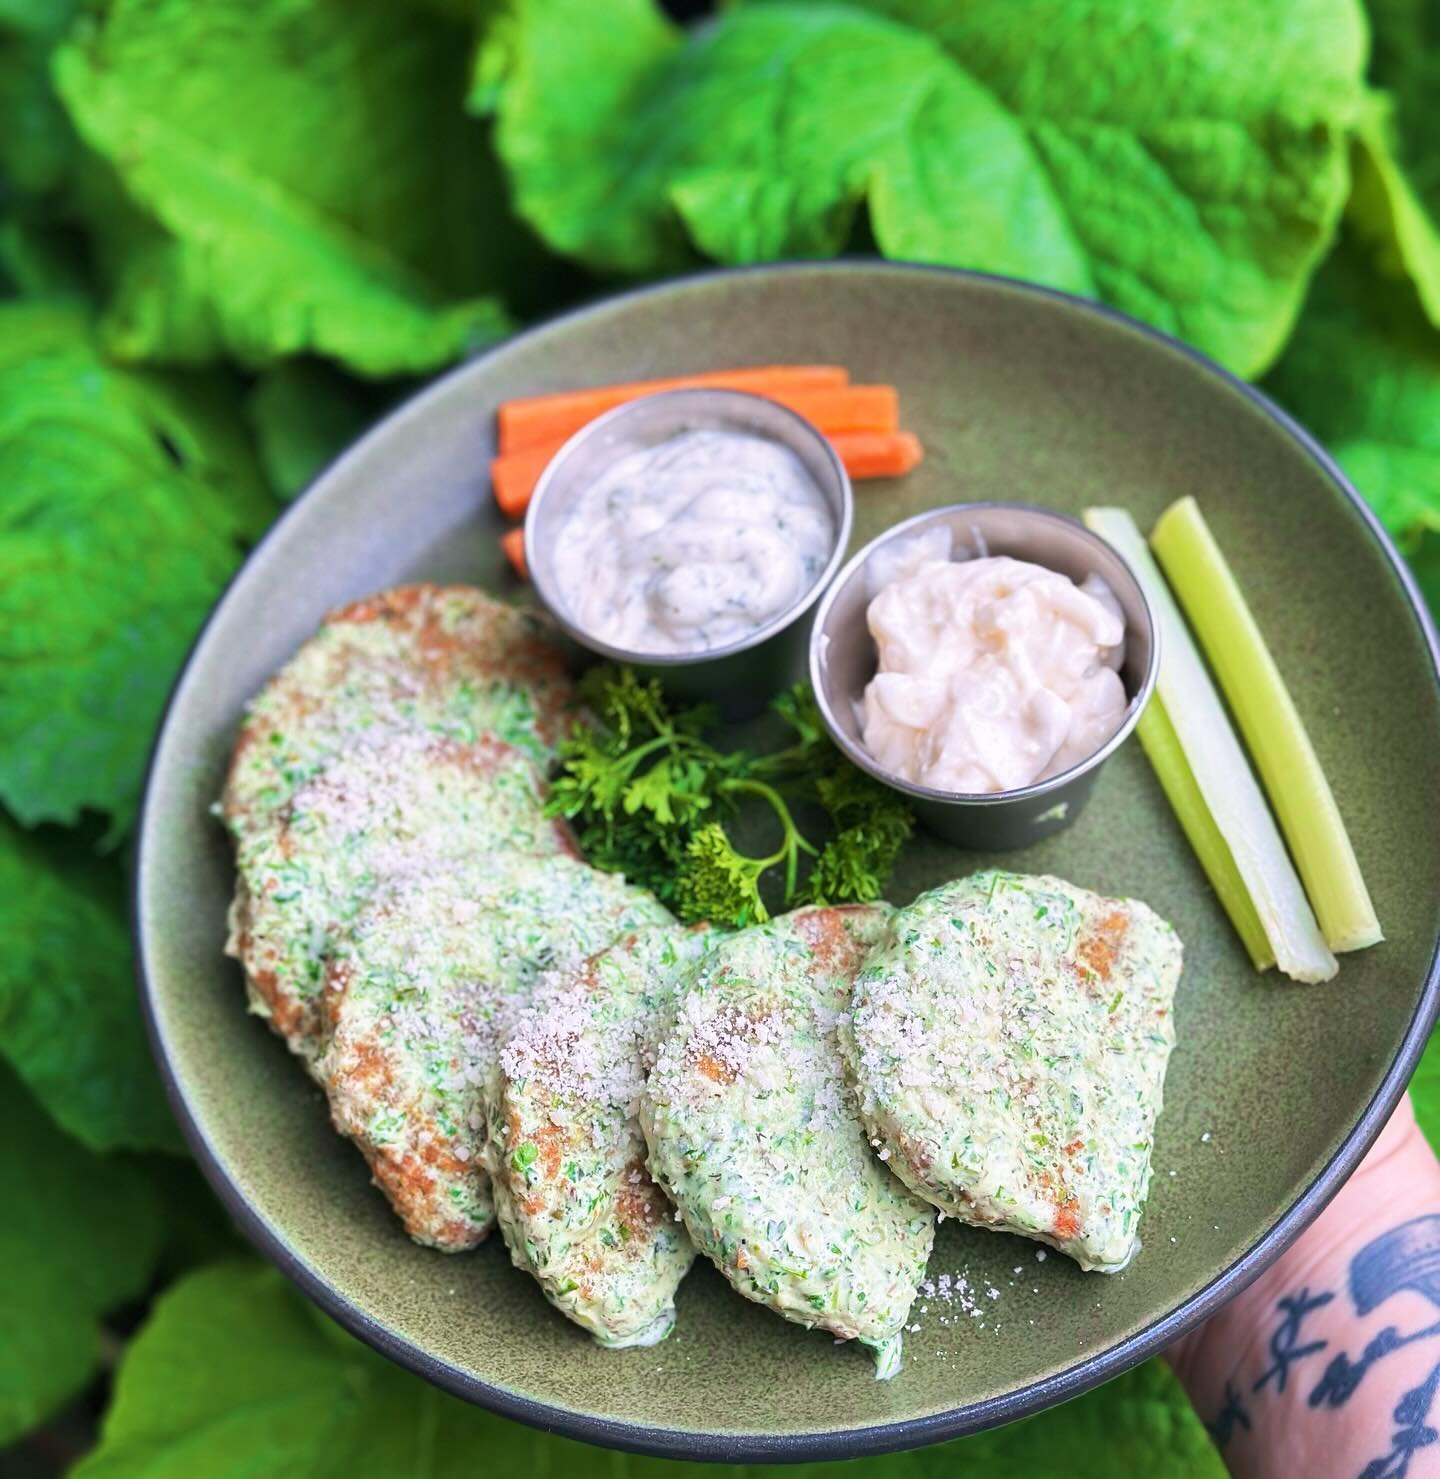 It&rsquo;s Wing Wednesday and that means a new flavor: Green Goddess Wings 

These seitan wings are tossed in a house made dressing with dill, cilantro, basil, parsley, chive, garlic, scallion the perfect colors for summer. Served with ranch or blue 